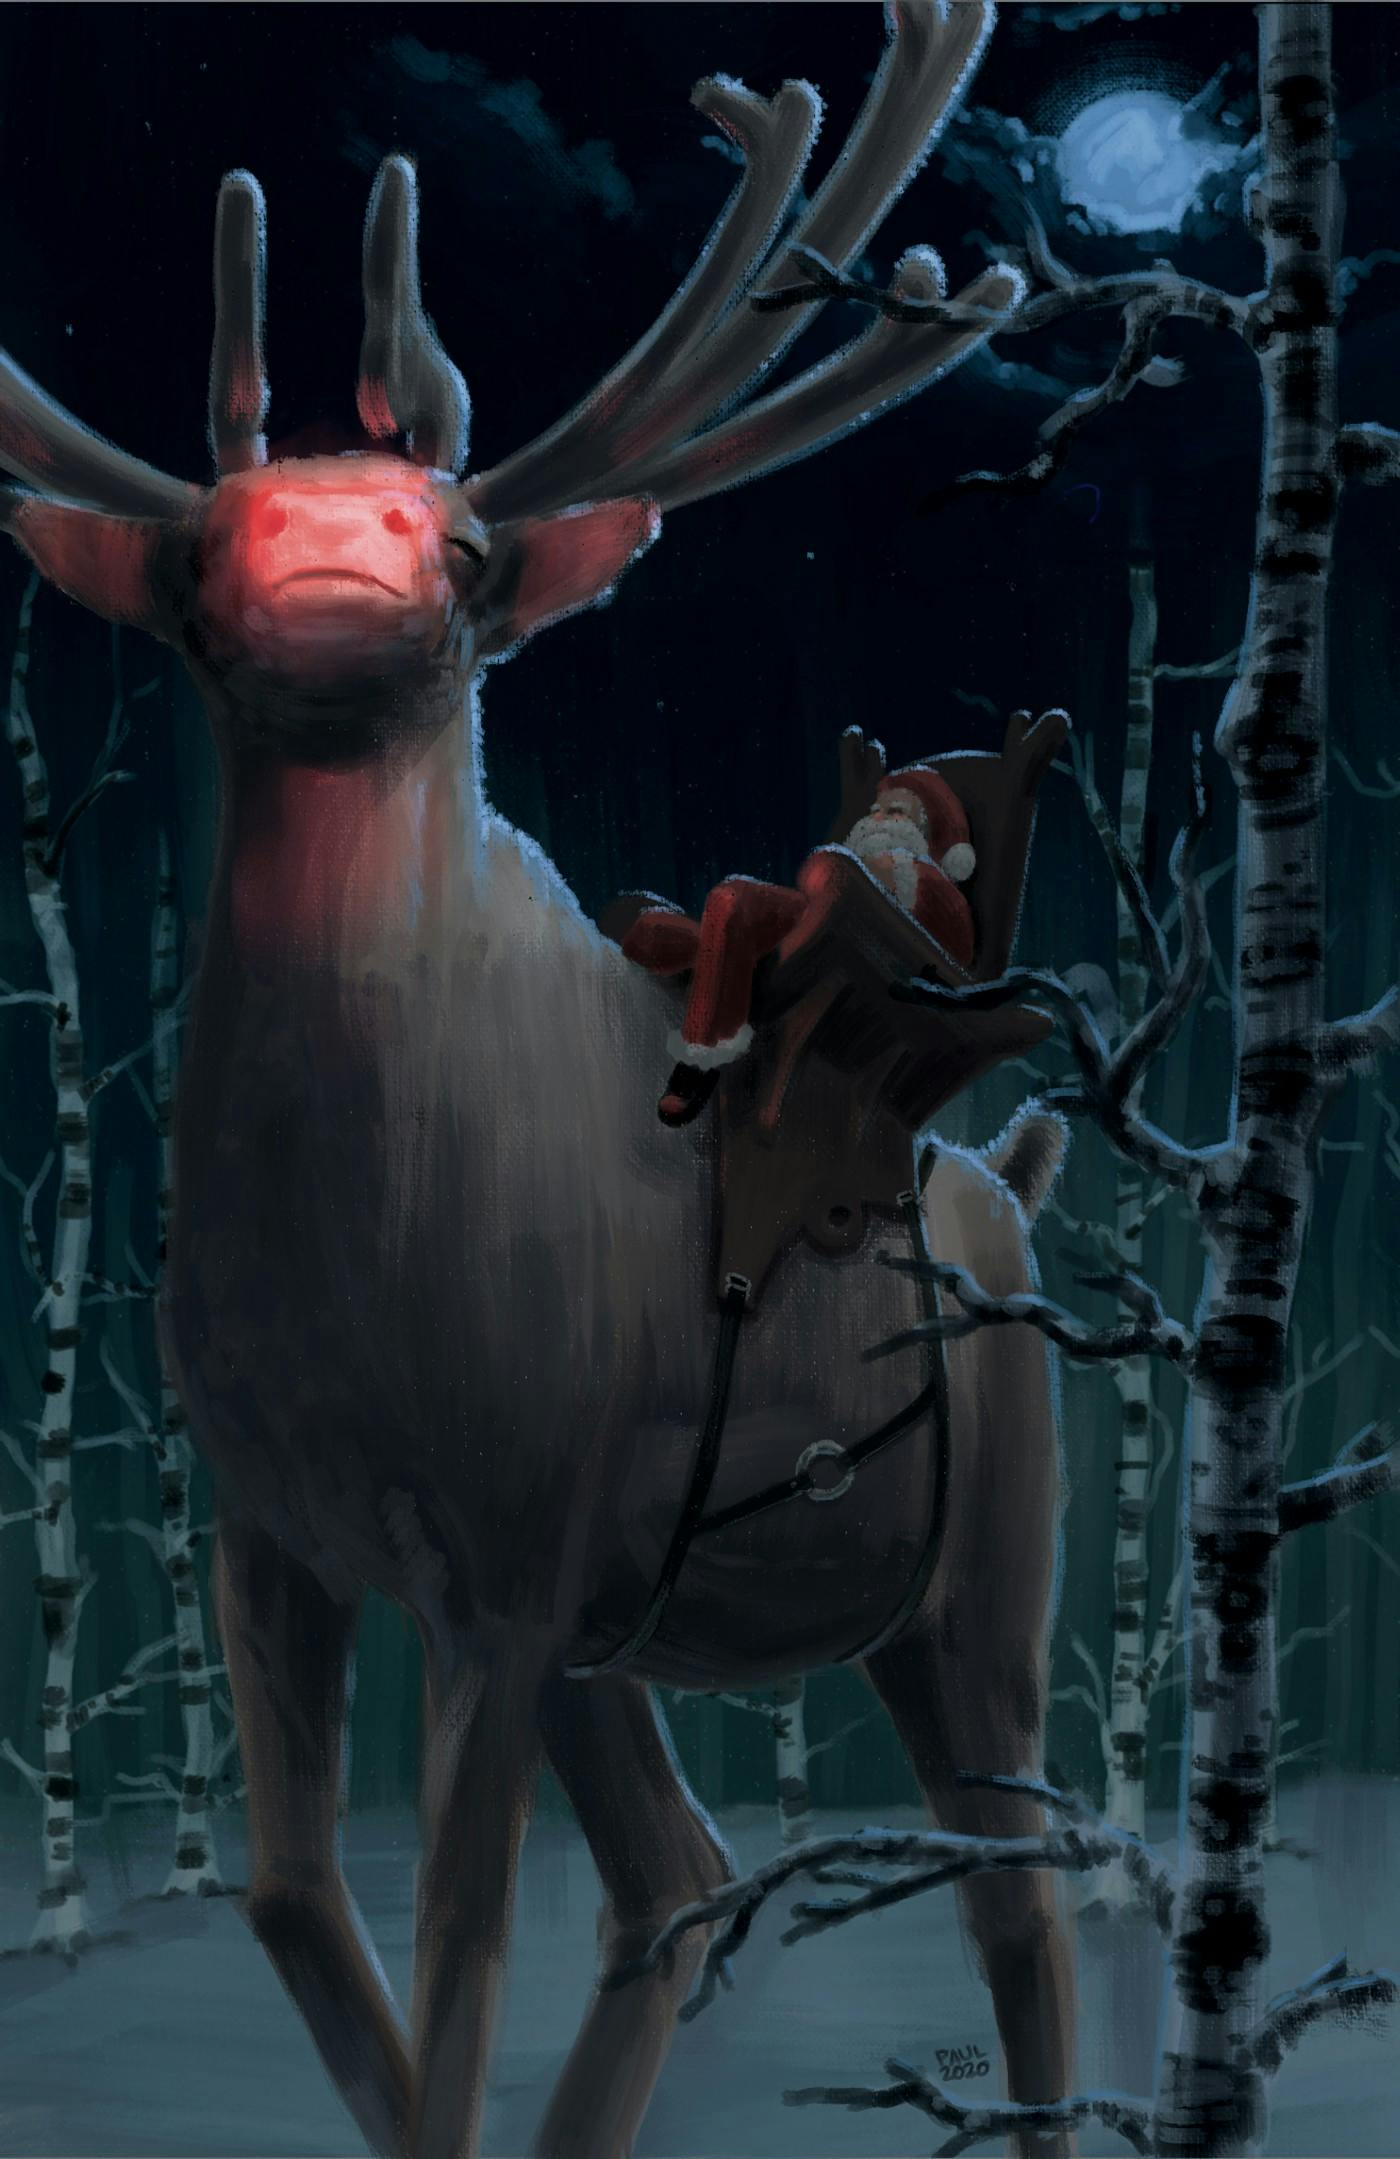 A digital painting of Santa Claus riding a massive reindeer with a glowing red snout among a forest of birch trees at night while the moon glows above.